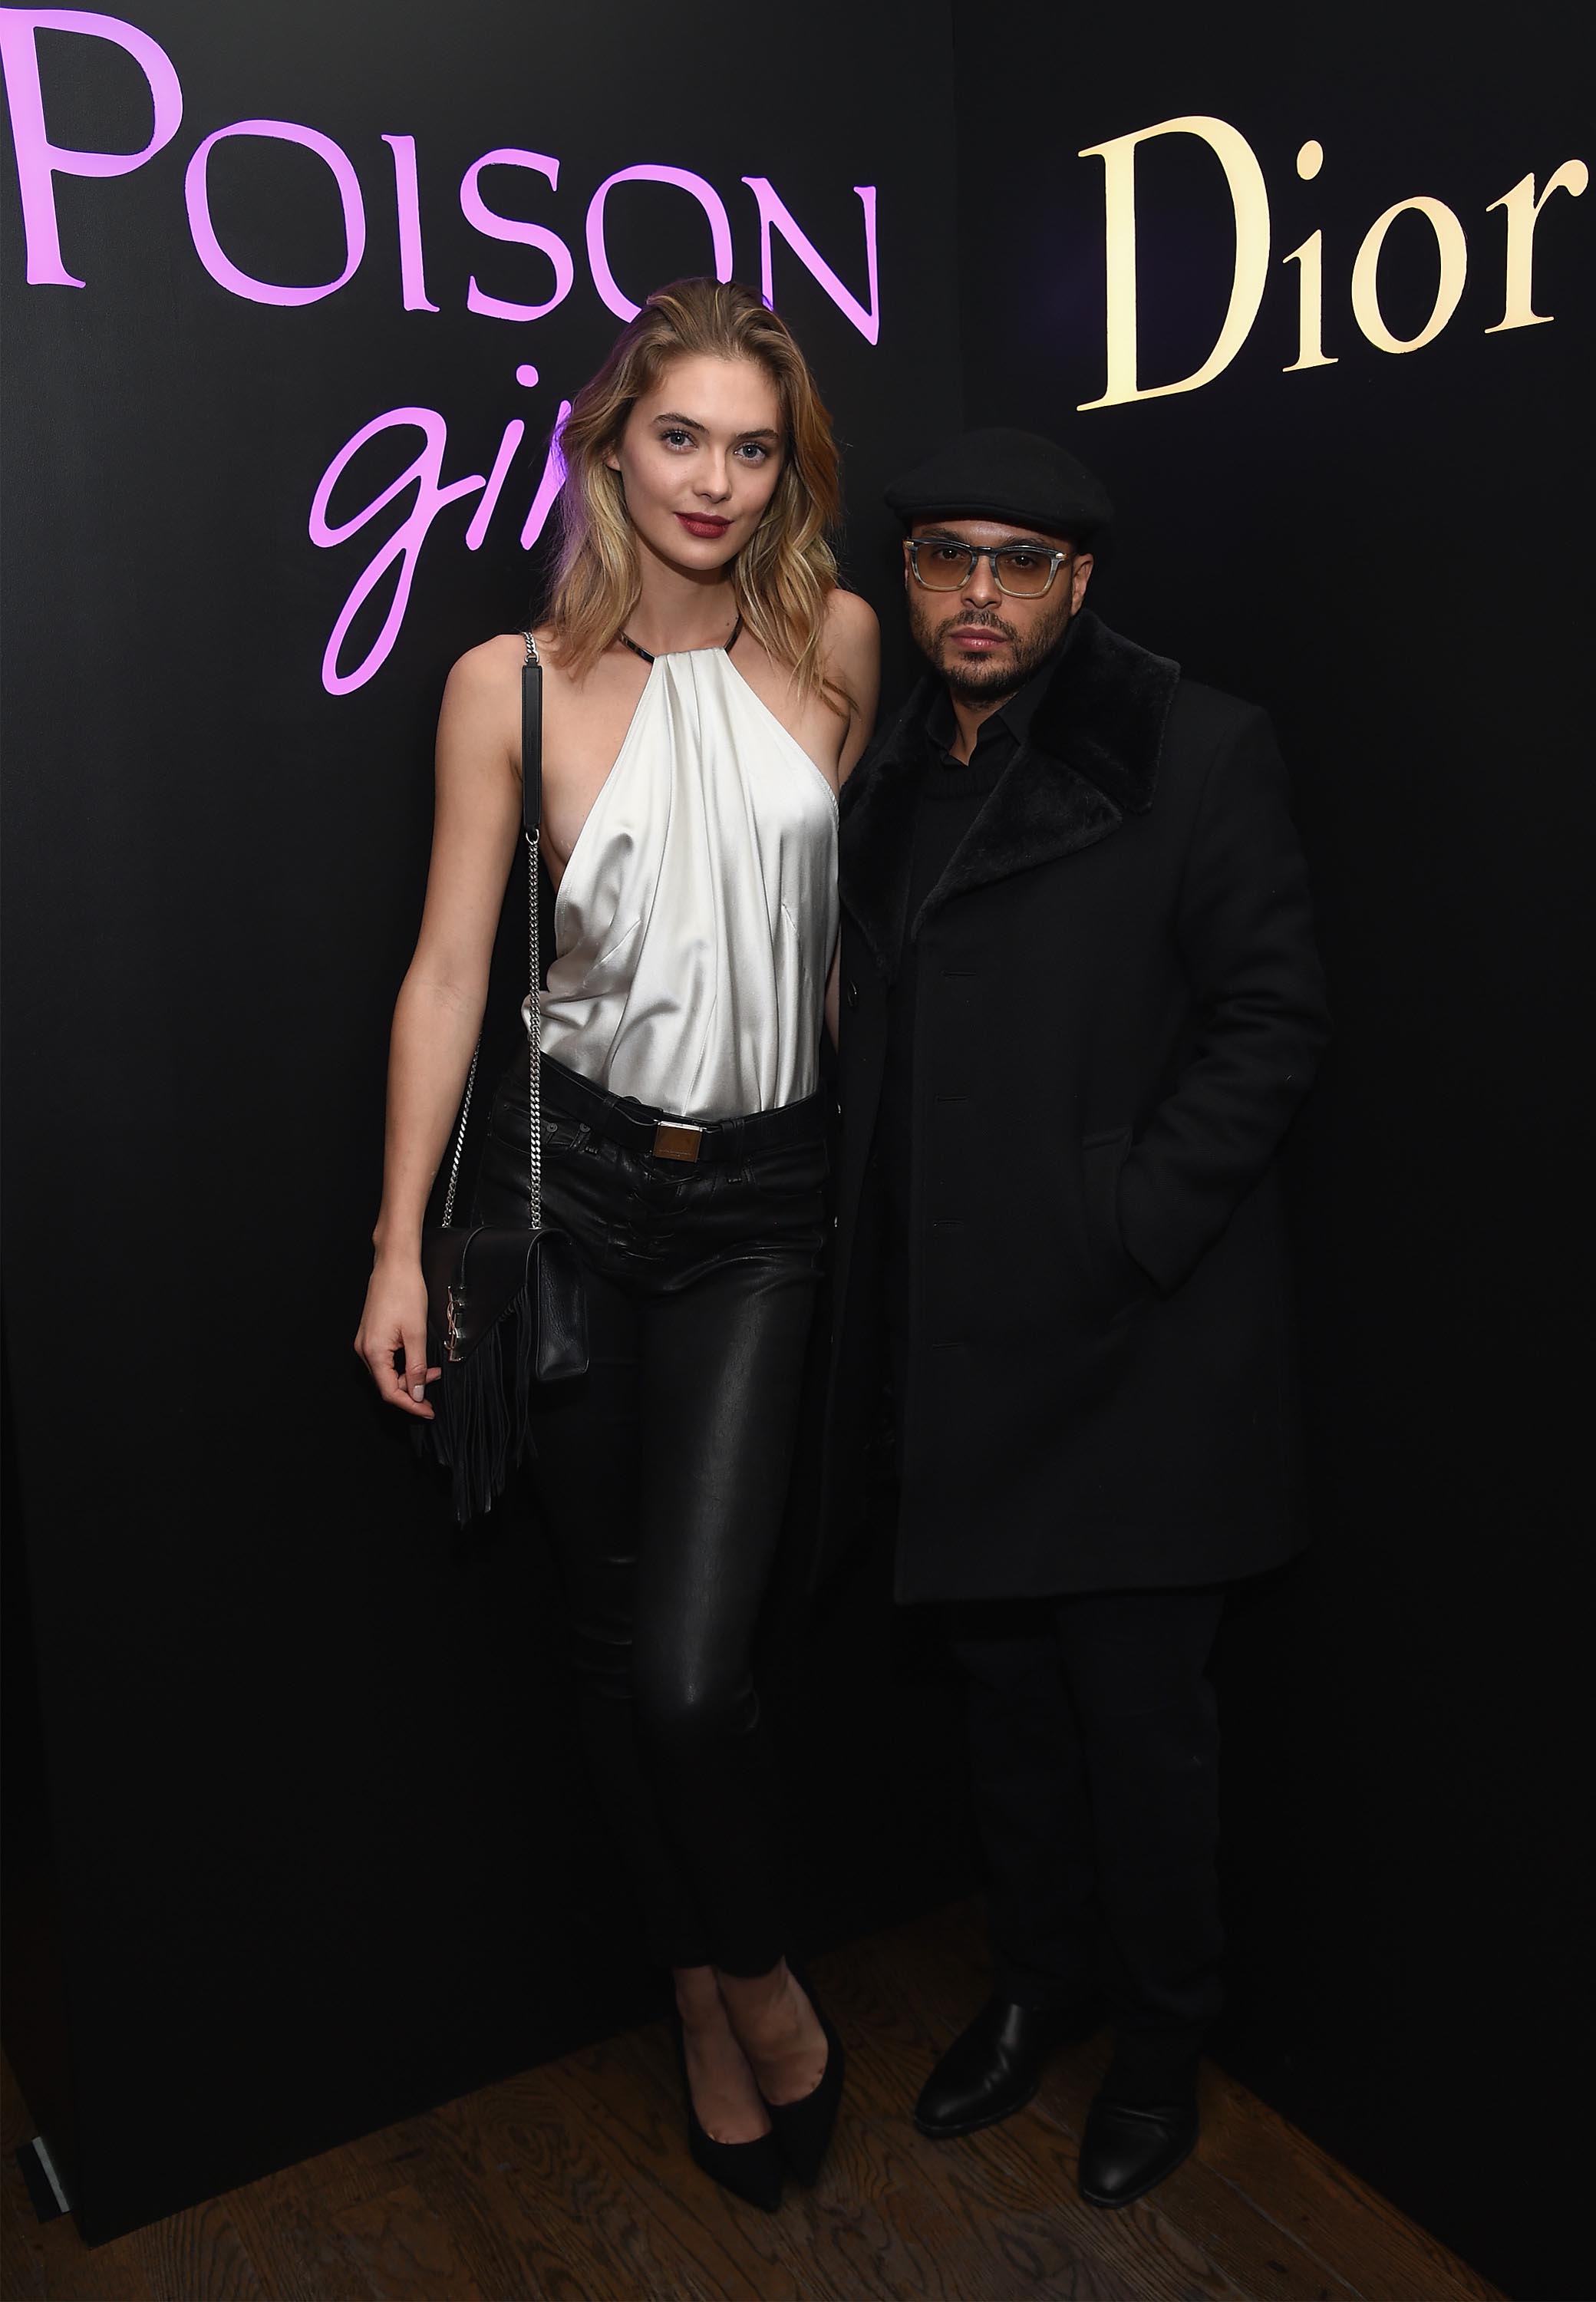 Megan Williams attends NY Poison Club hosted by Dior with Camille Rowe